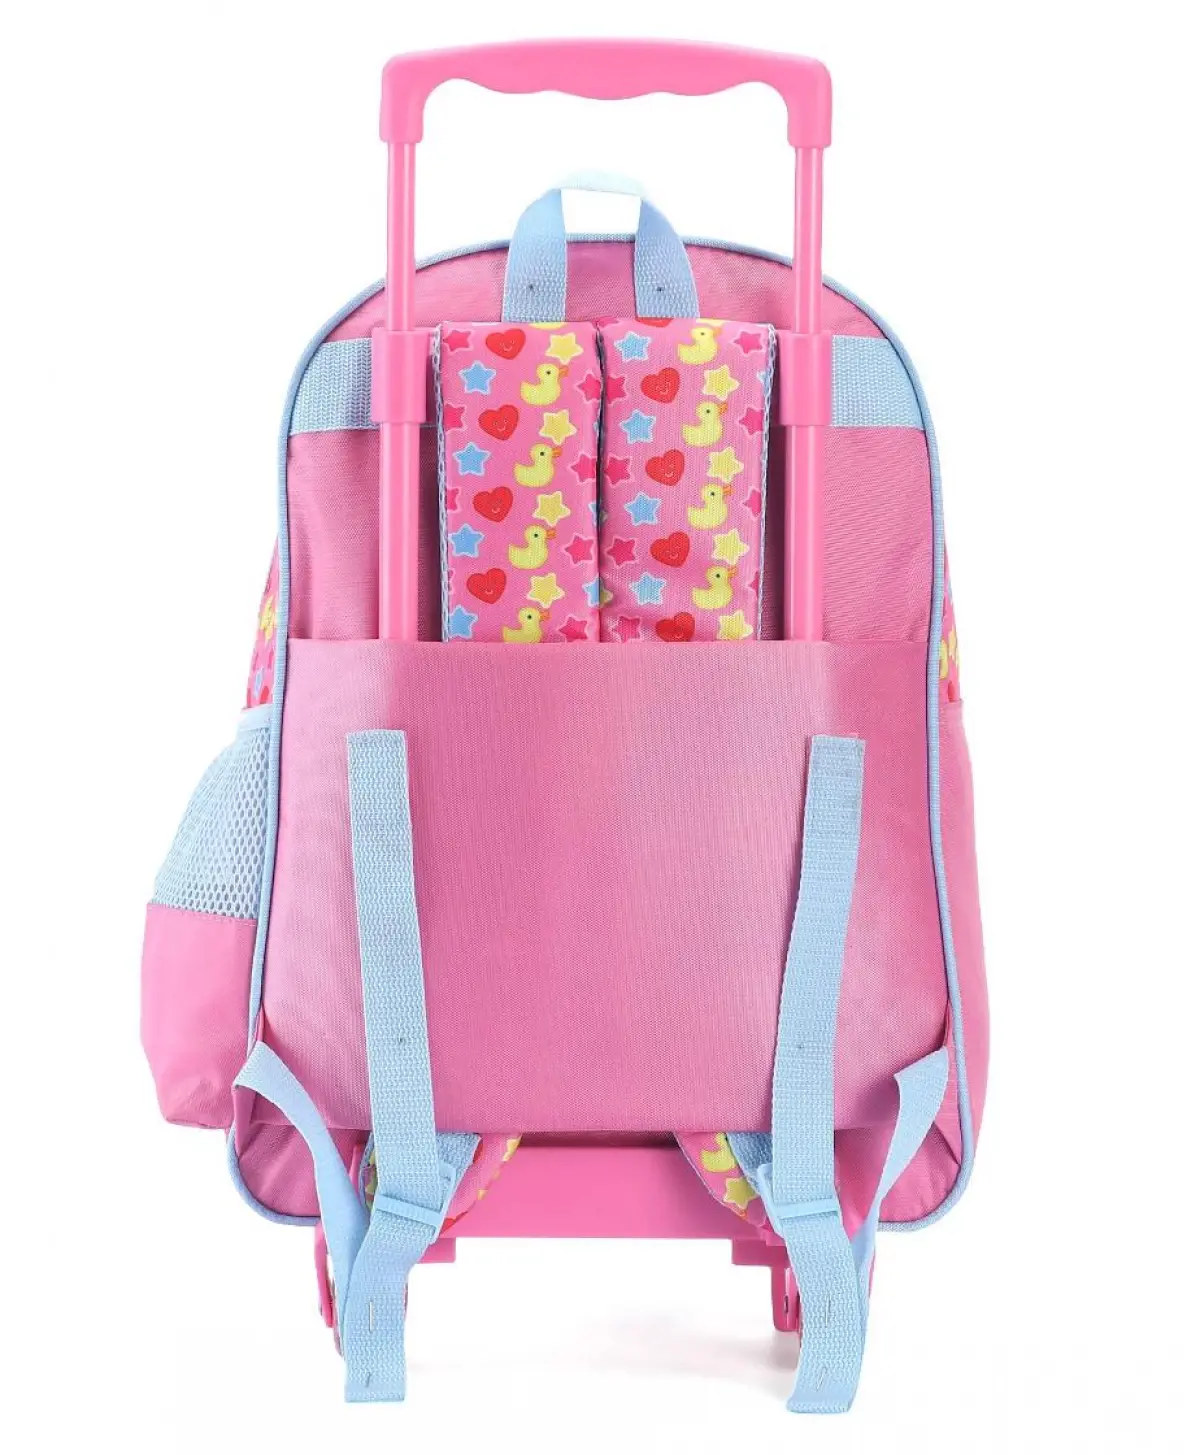 Striders 16 inches Peppa Pig-Inspired School Trolley Bag for Little Explorers Multicolor For Kids Ages 6Y+